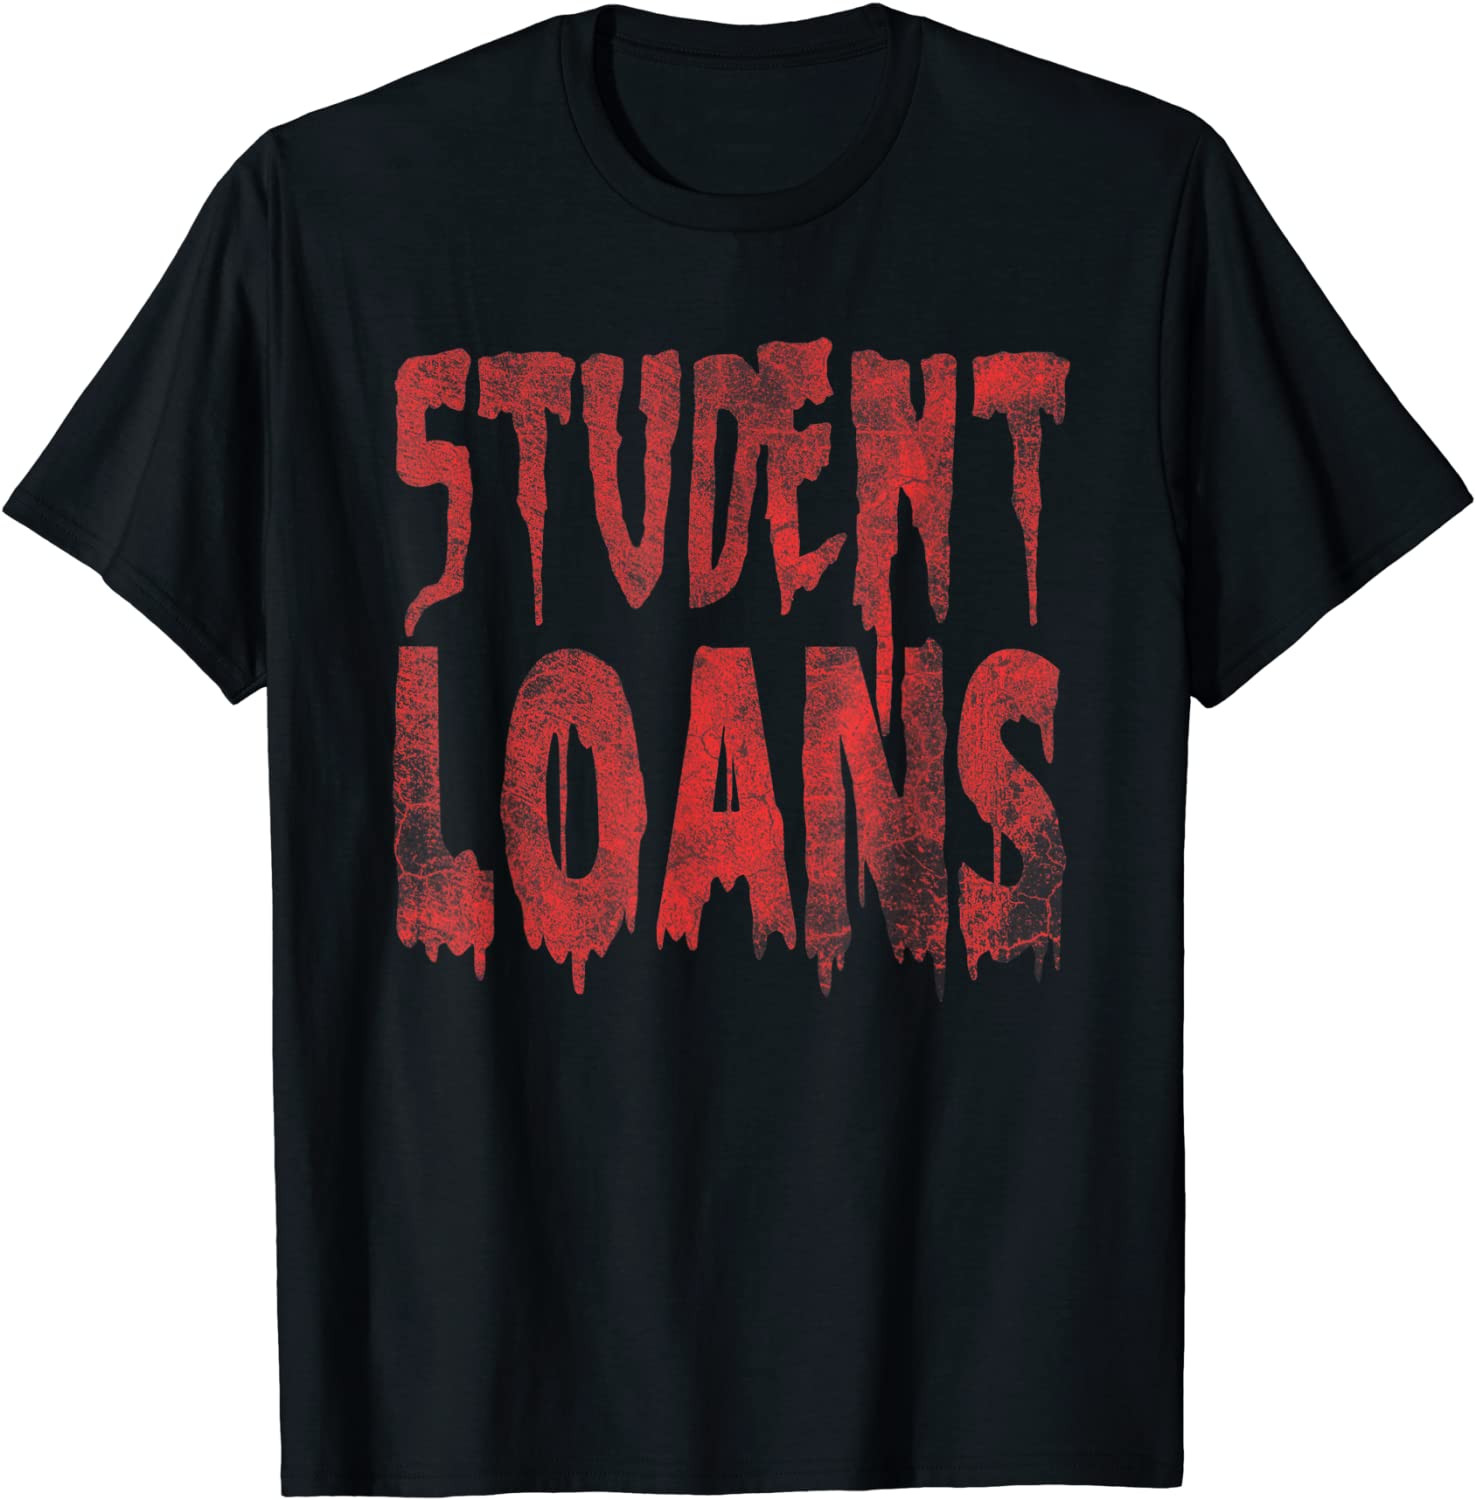 Students Loans Payment Halloween Costume Idea Group T-Shirt